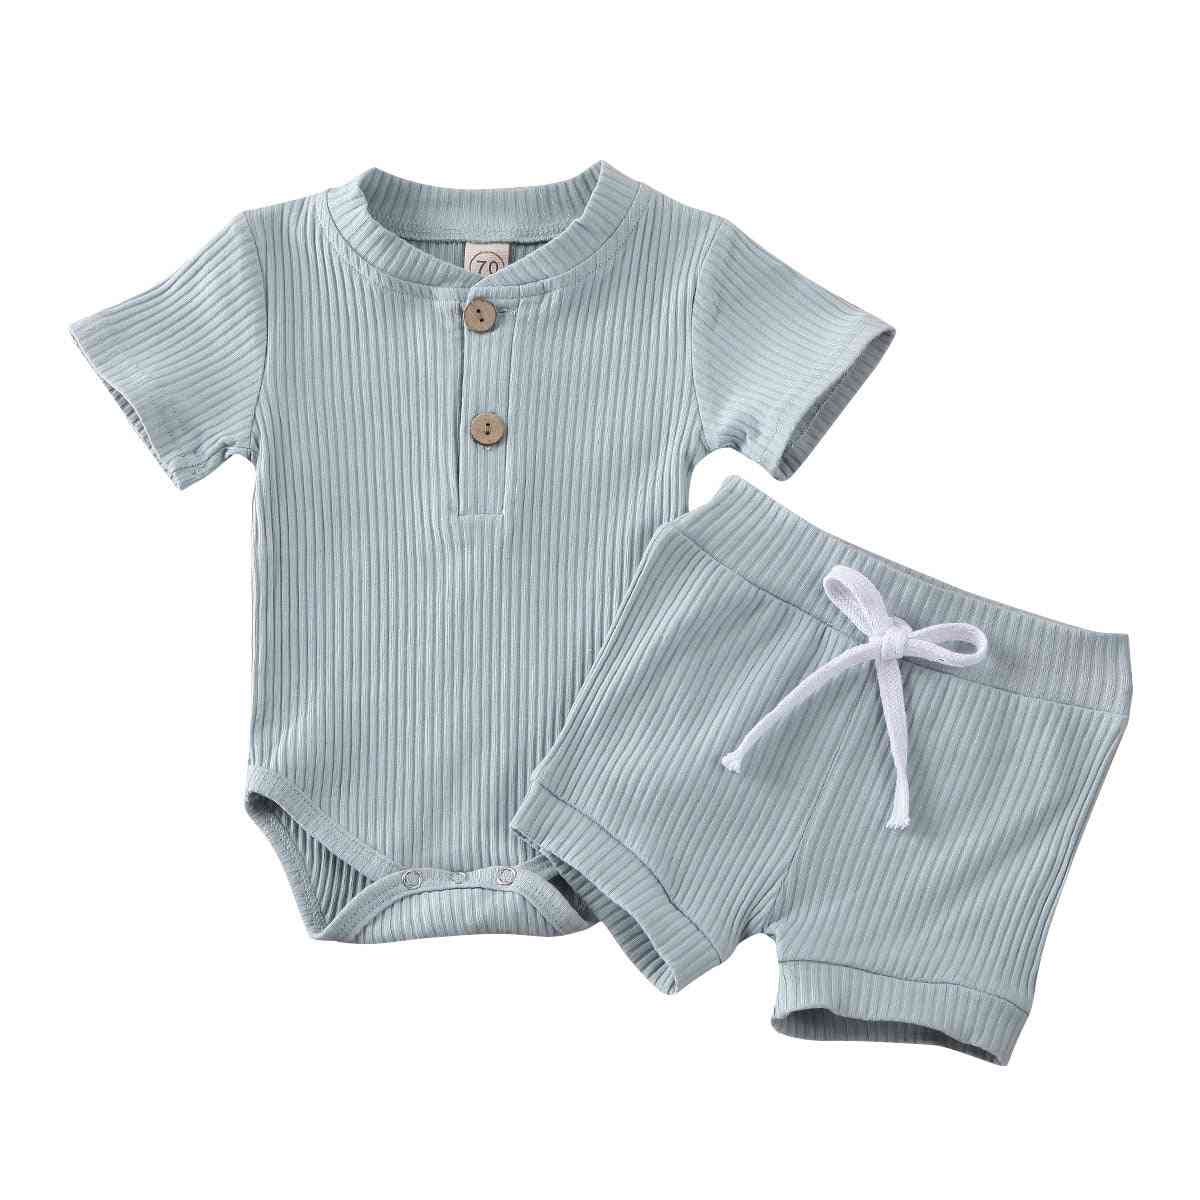 Baby Summer Clothing, Short Sleeve, Bodysuit Outfits For Kids